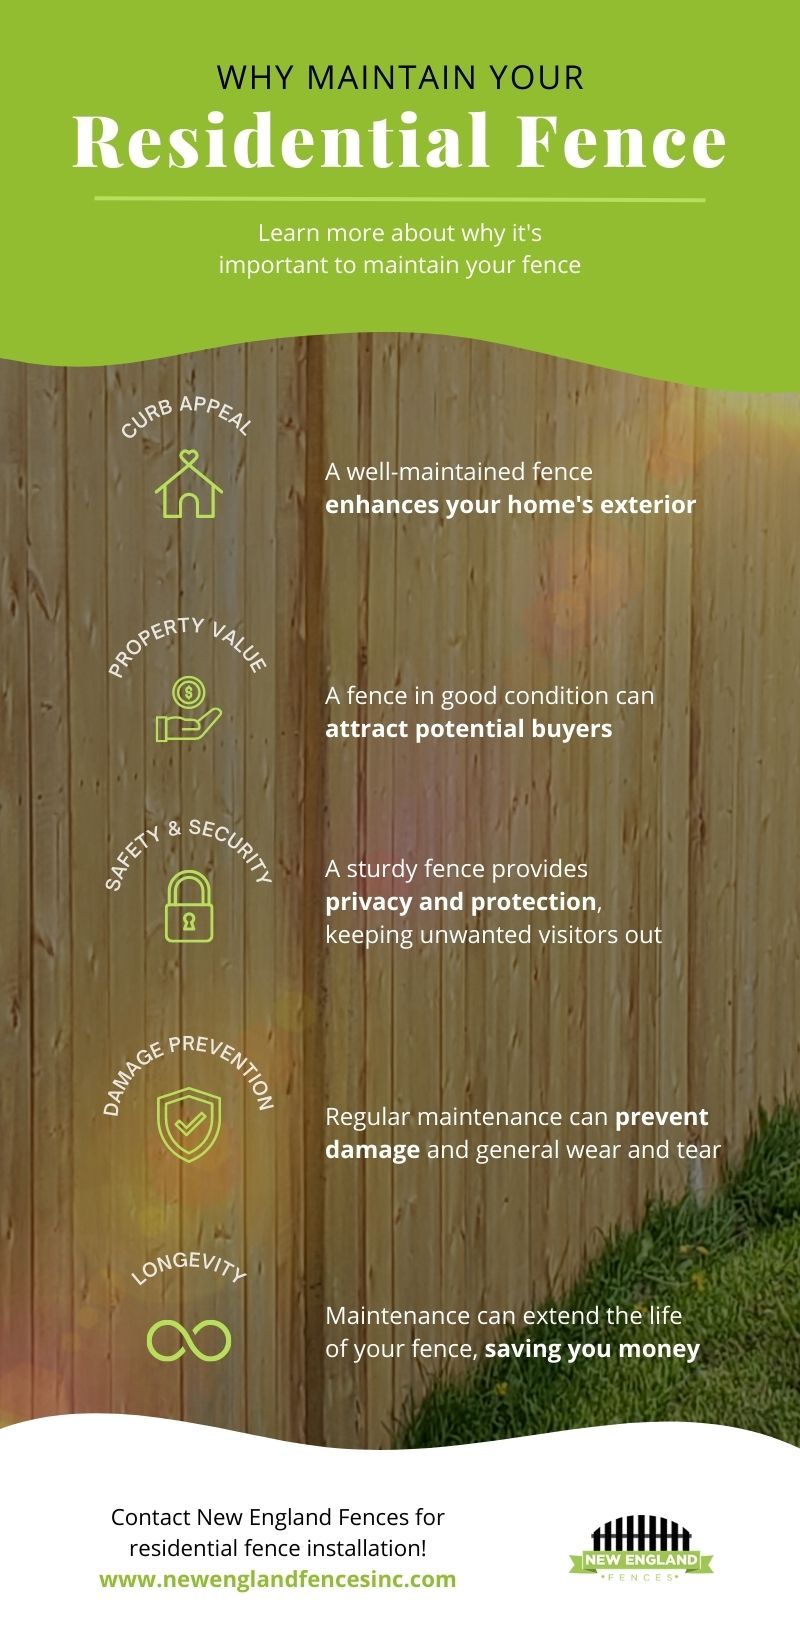 M30708 - New England Fences - Infographic - Why Maintain Your Residential Fence.jpg